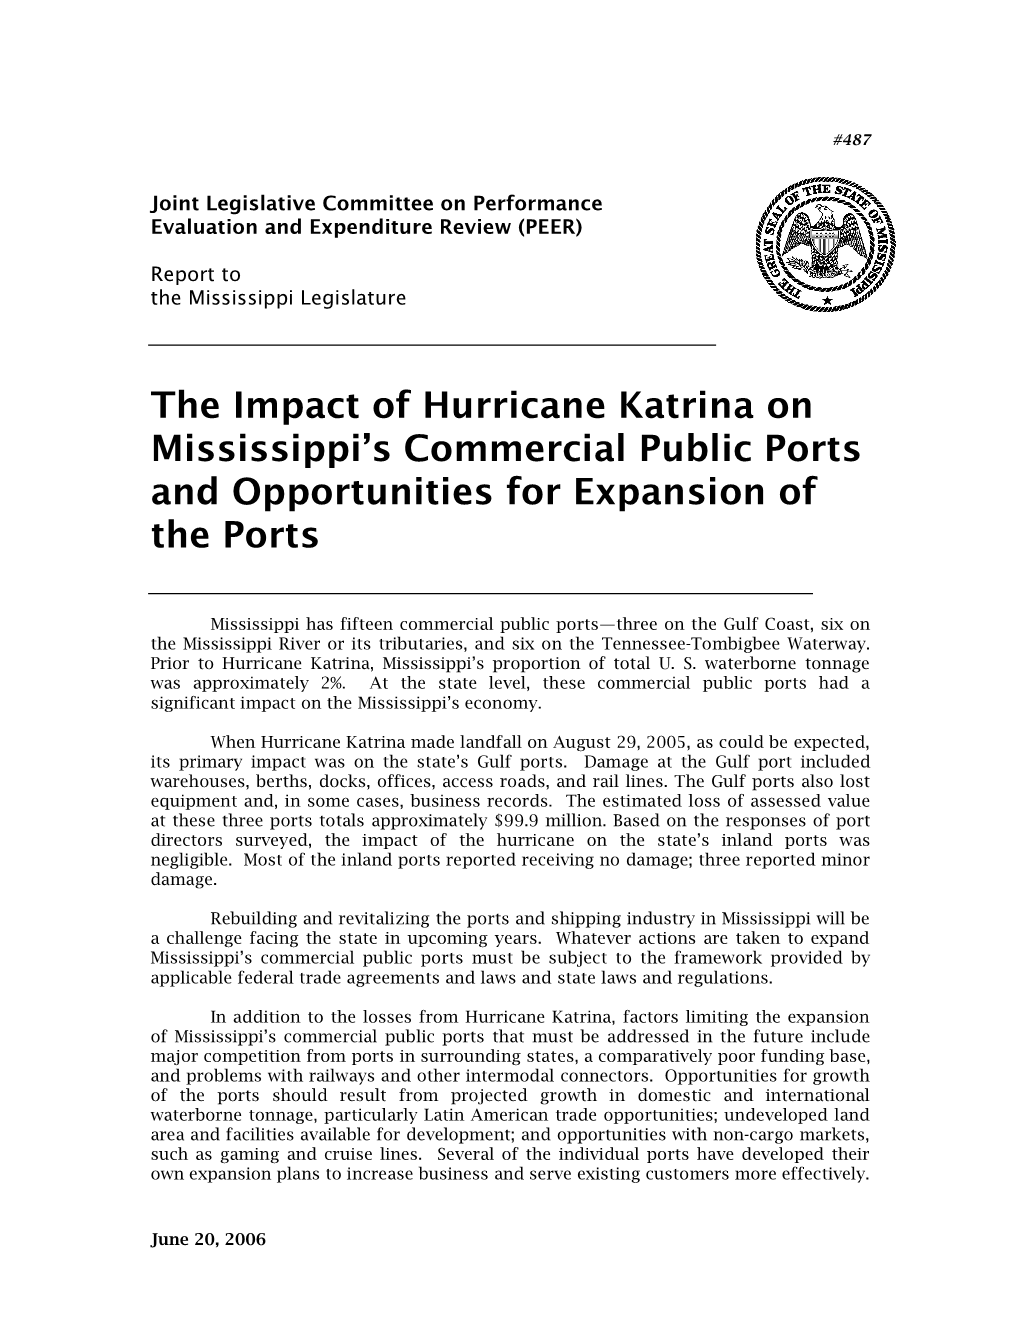 The Impact of Hurricane Katrina on Mississippi's Commercial Public Ports and Opportunities for Expansion of the Ports